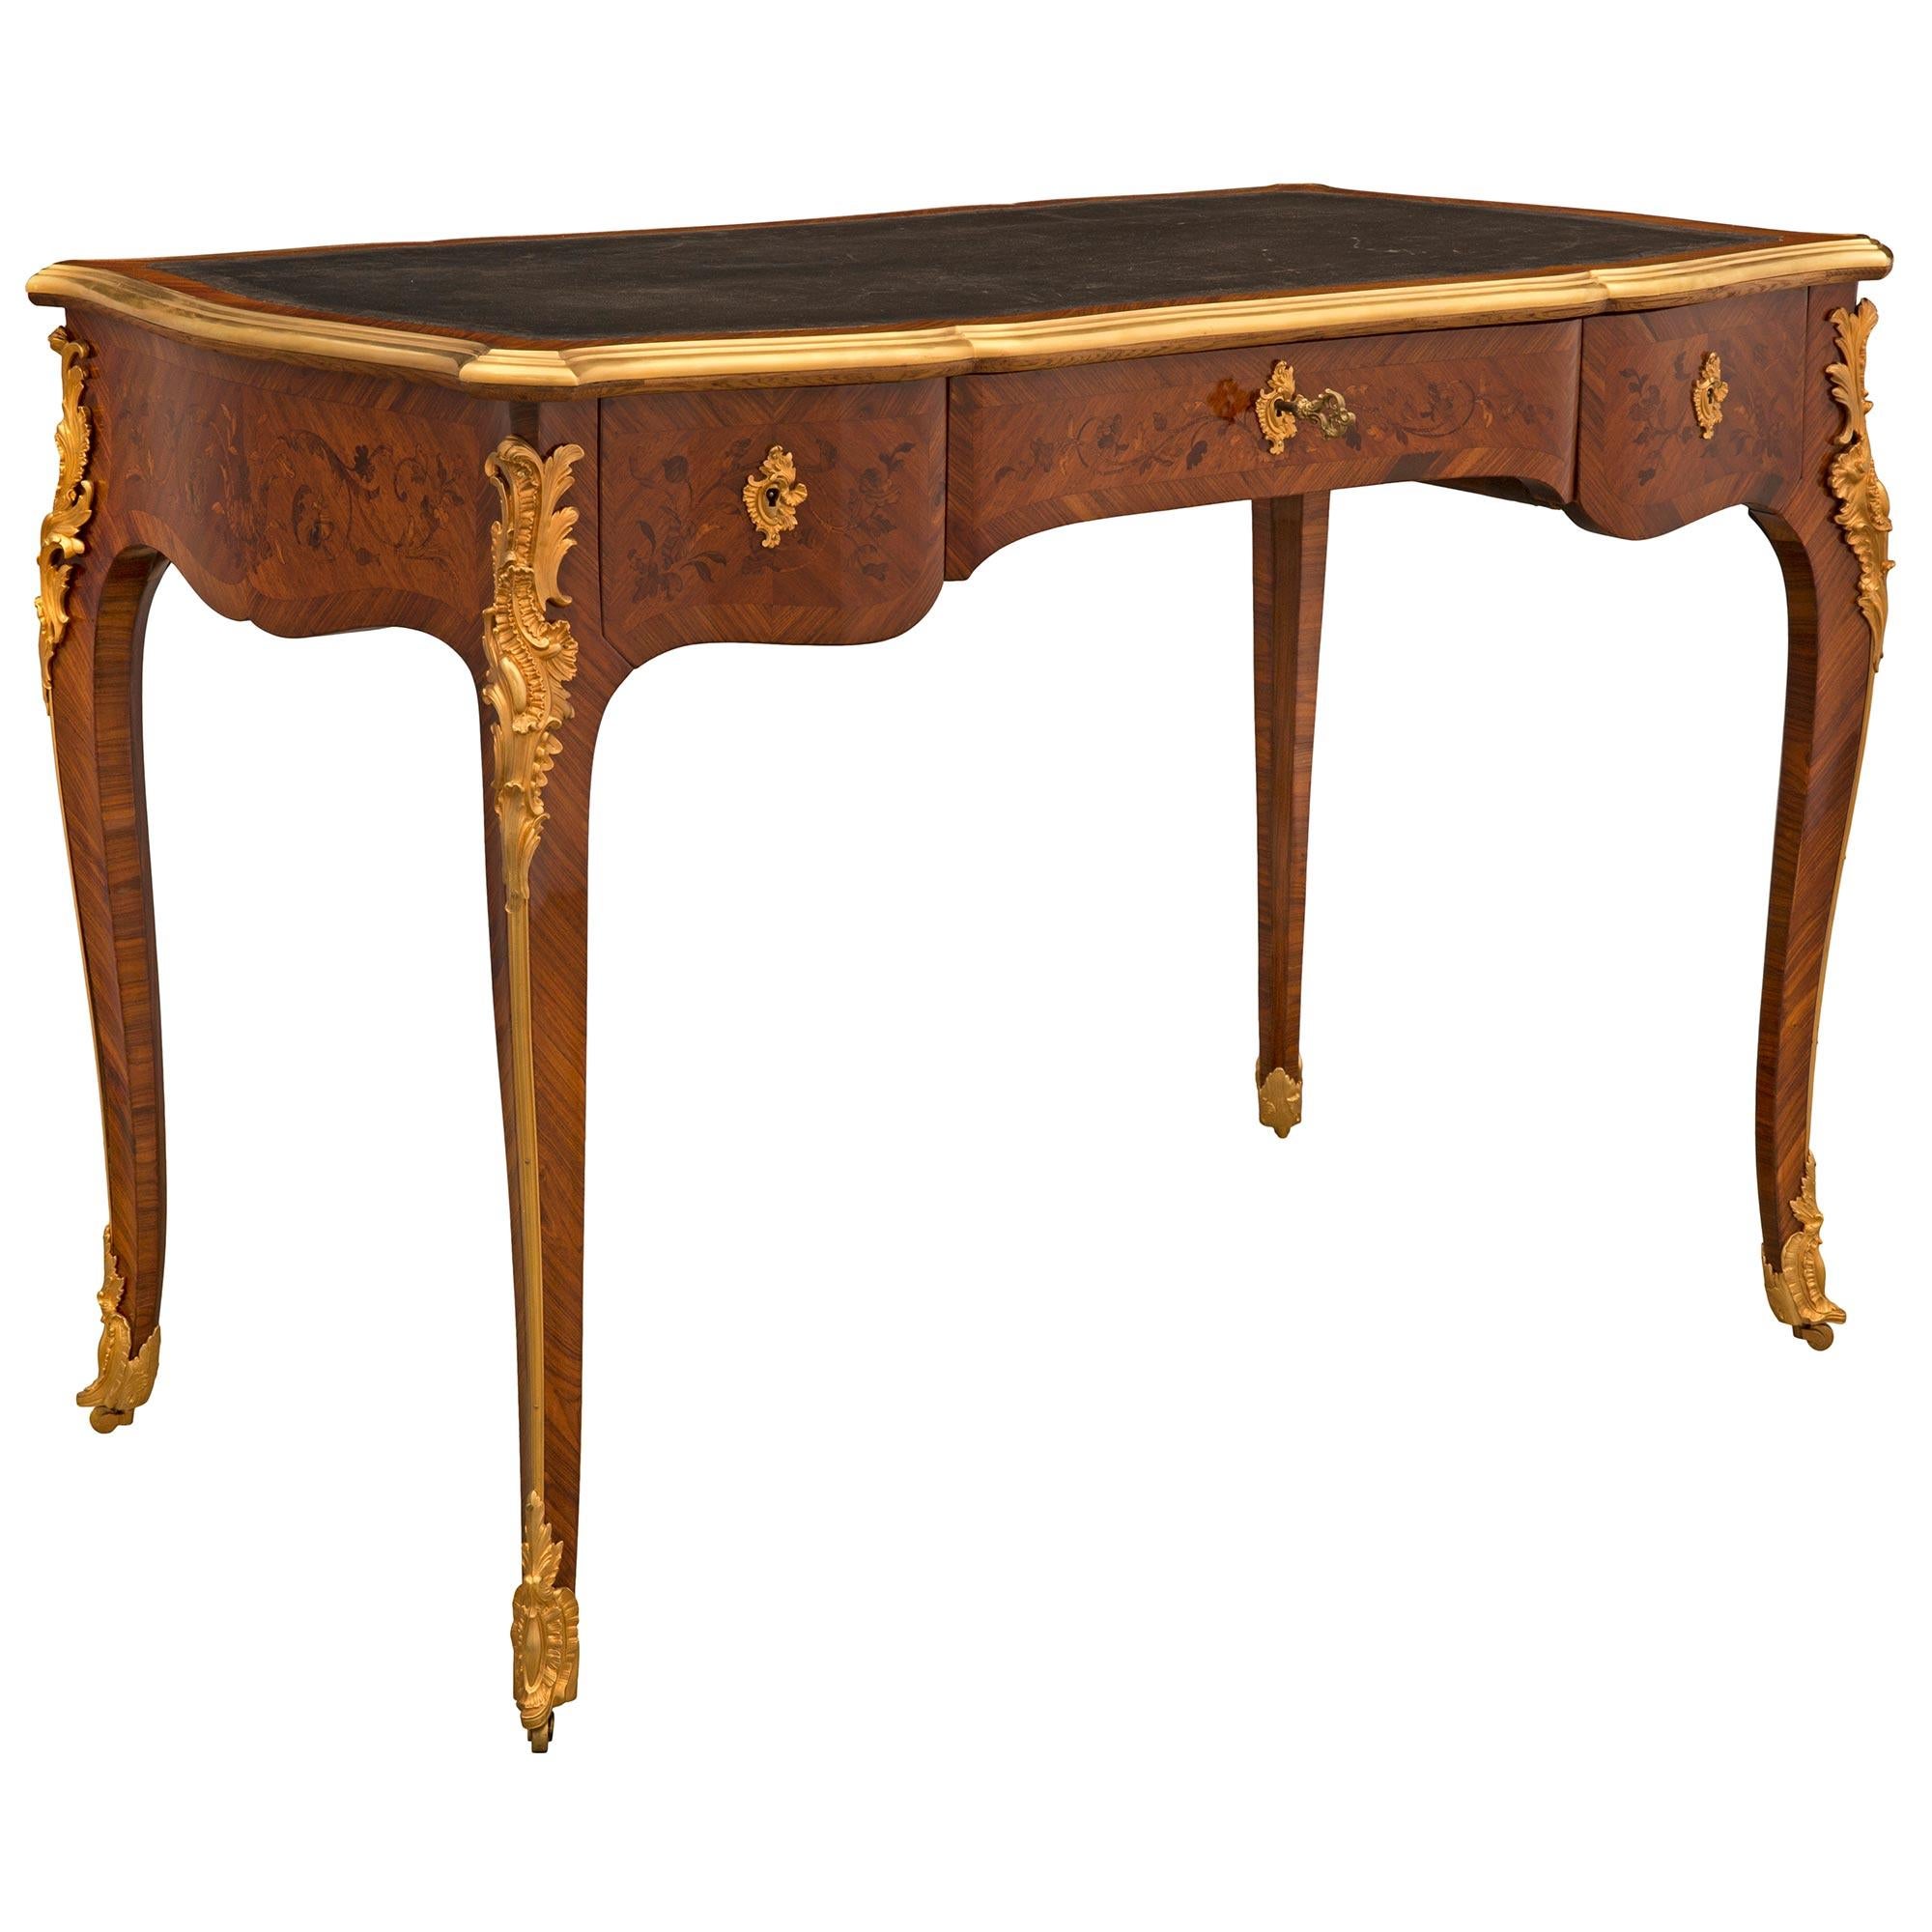 French 19th Century Louis XV Style Tulipwood and Kingwood Desk In Good Condition For Sale In West Palm Beach, FL